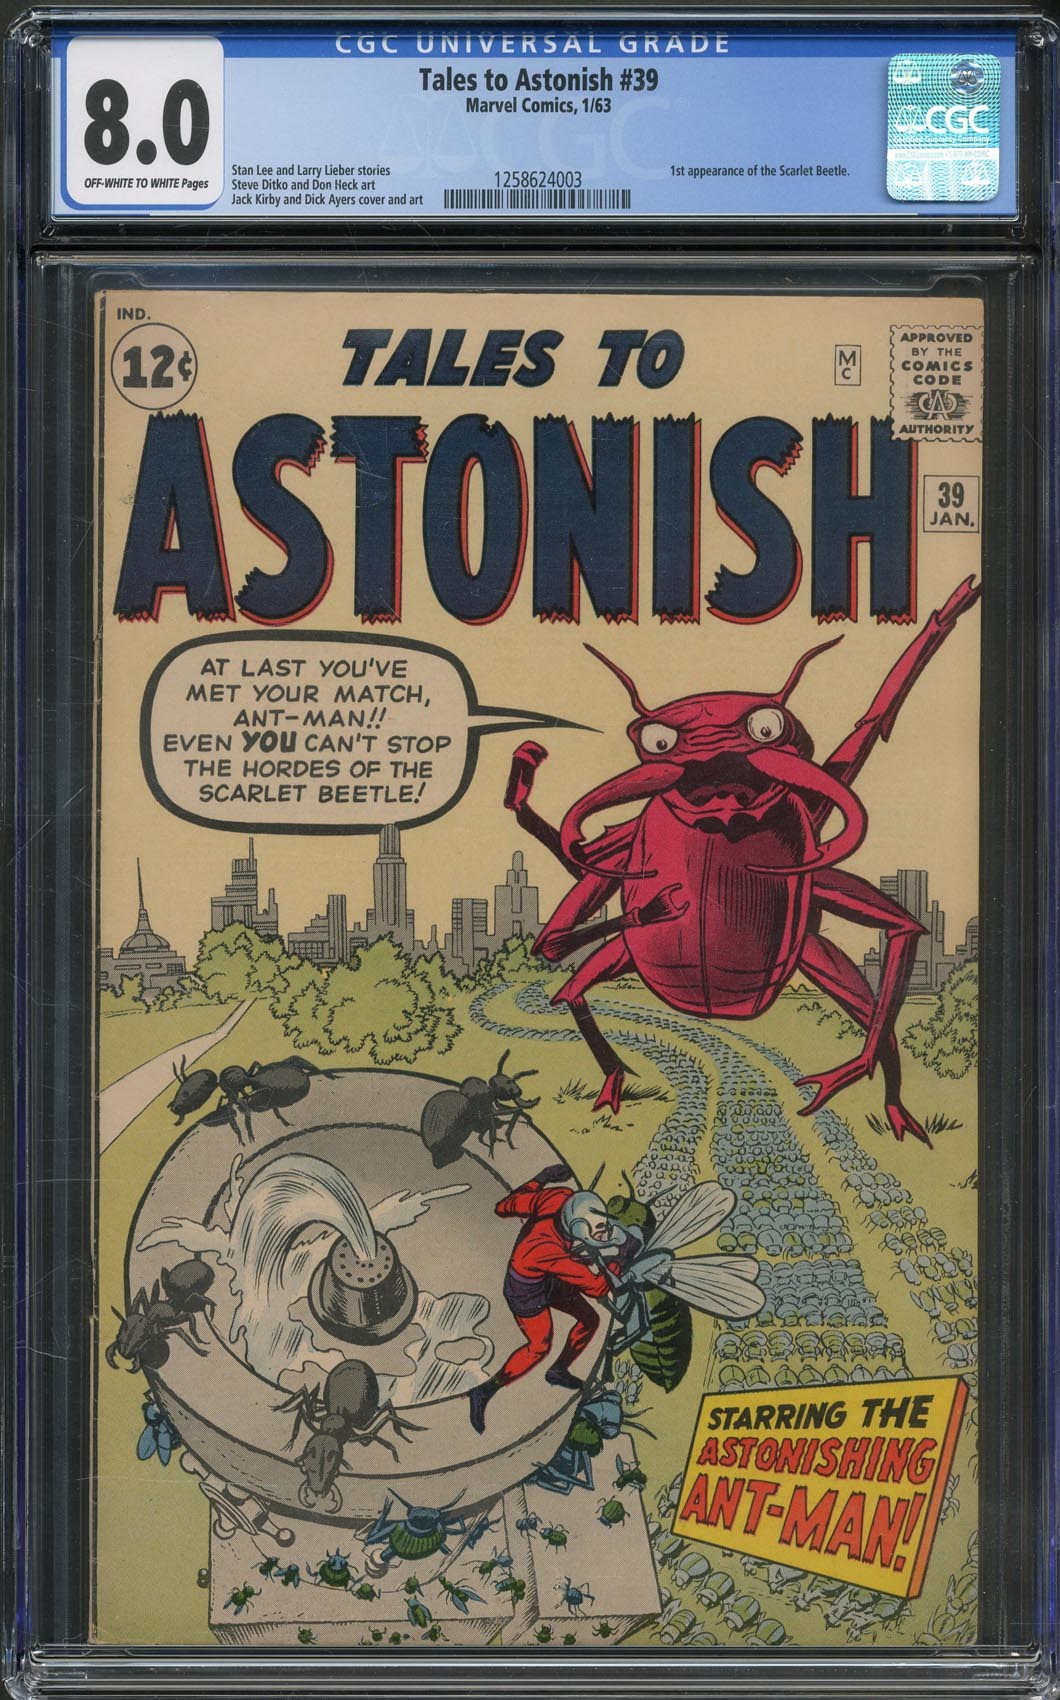 Rock And Pop Culture - Tales to Astonish #39 Featuring Ant Man (CGC 8)